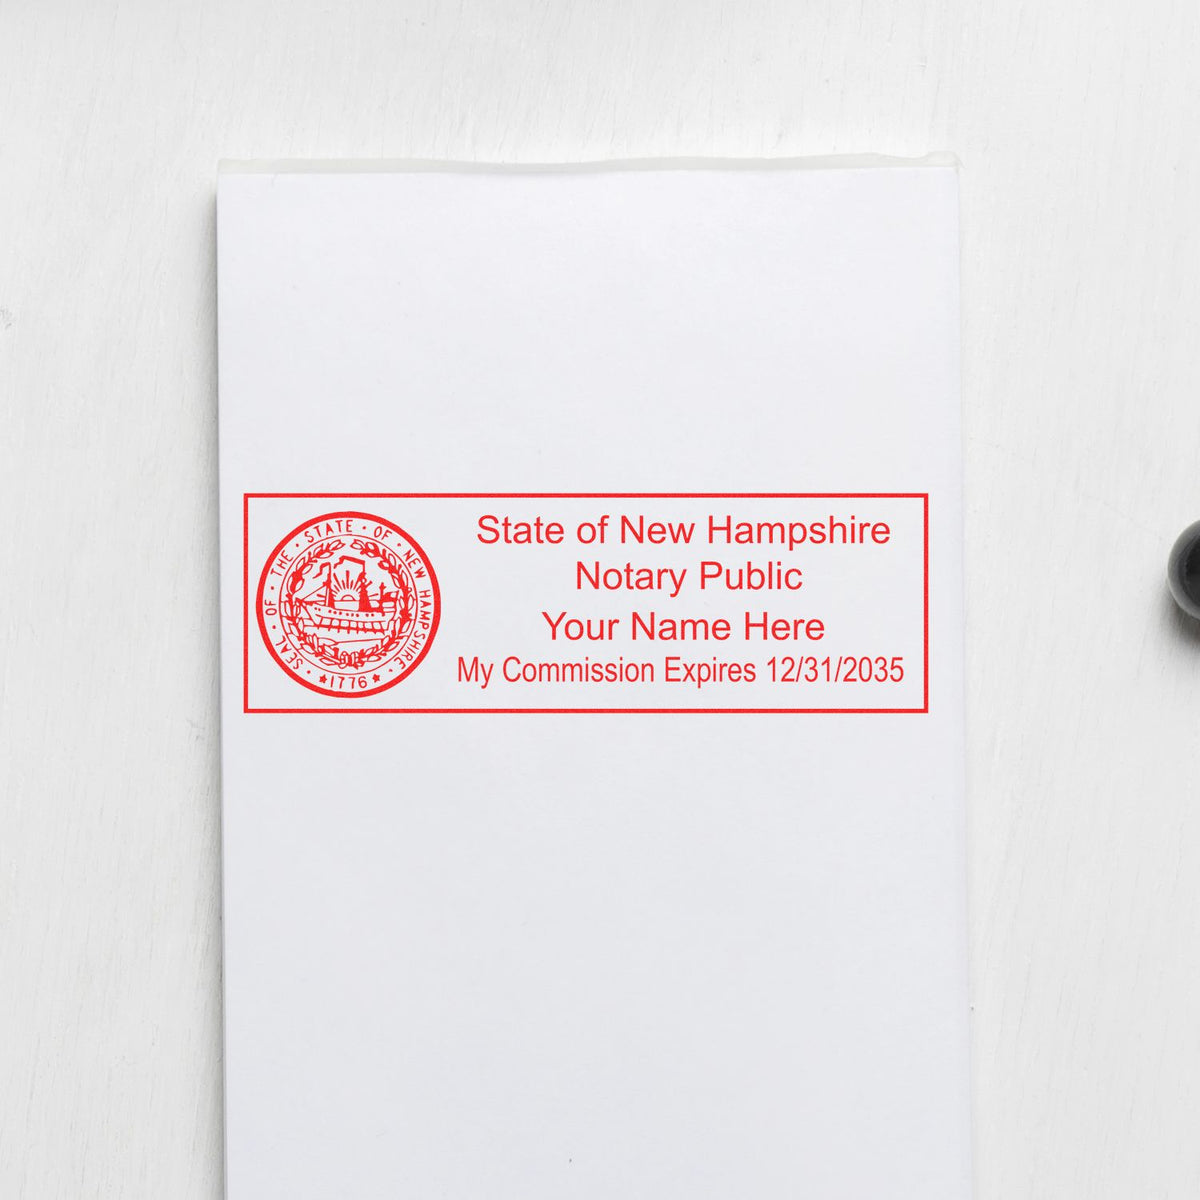 The Heavy-Duty New Hampshire Rectangular Notary Stamp stamp impression comes to life with a crisp, detailed photo on paper - showcasing true professional quality.